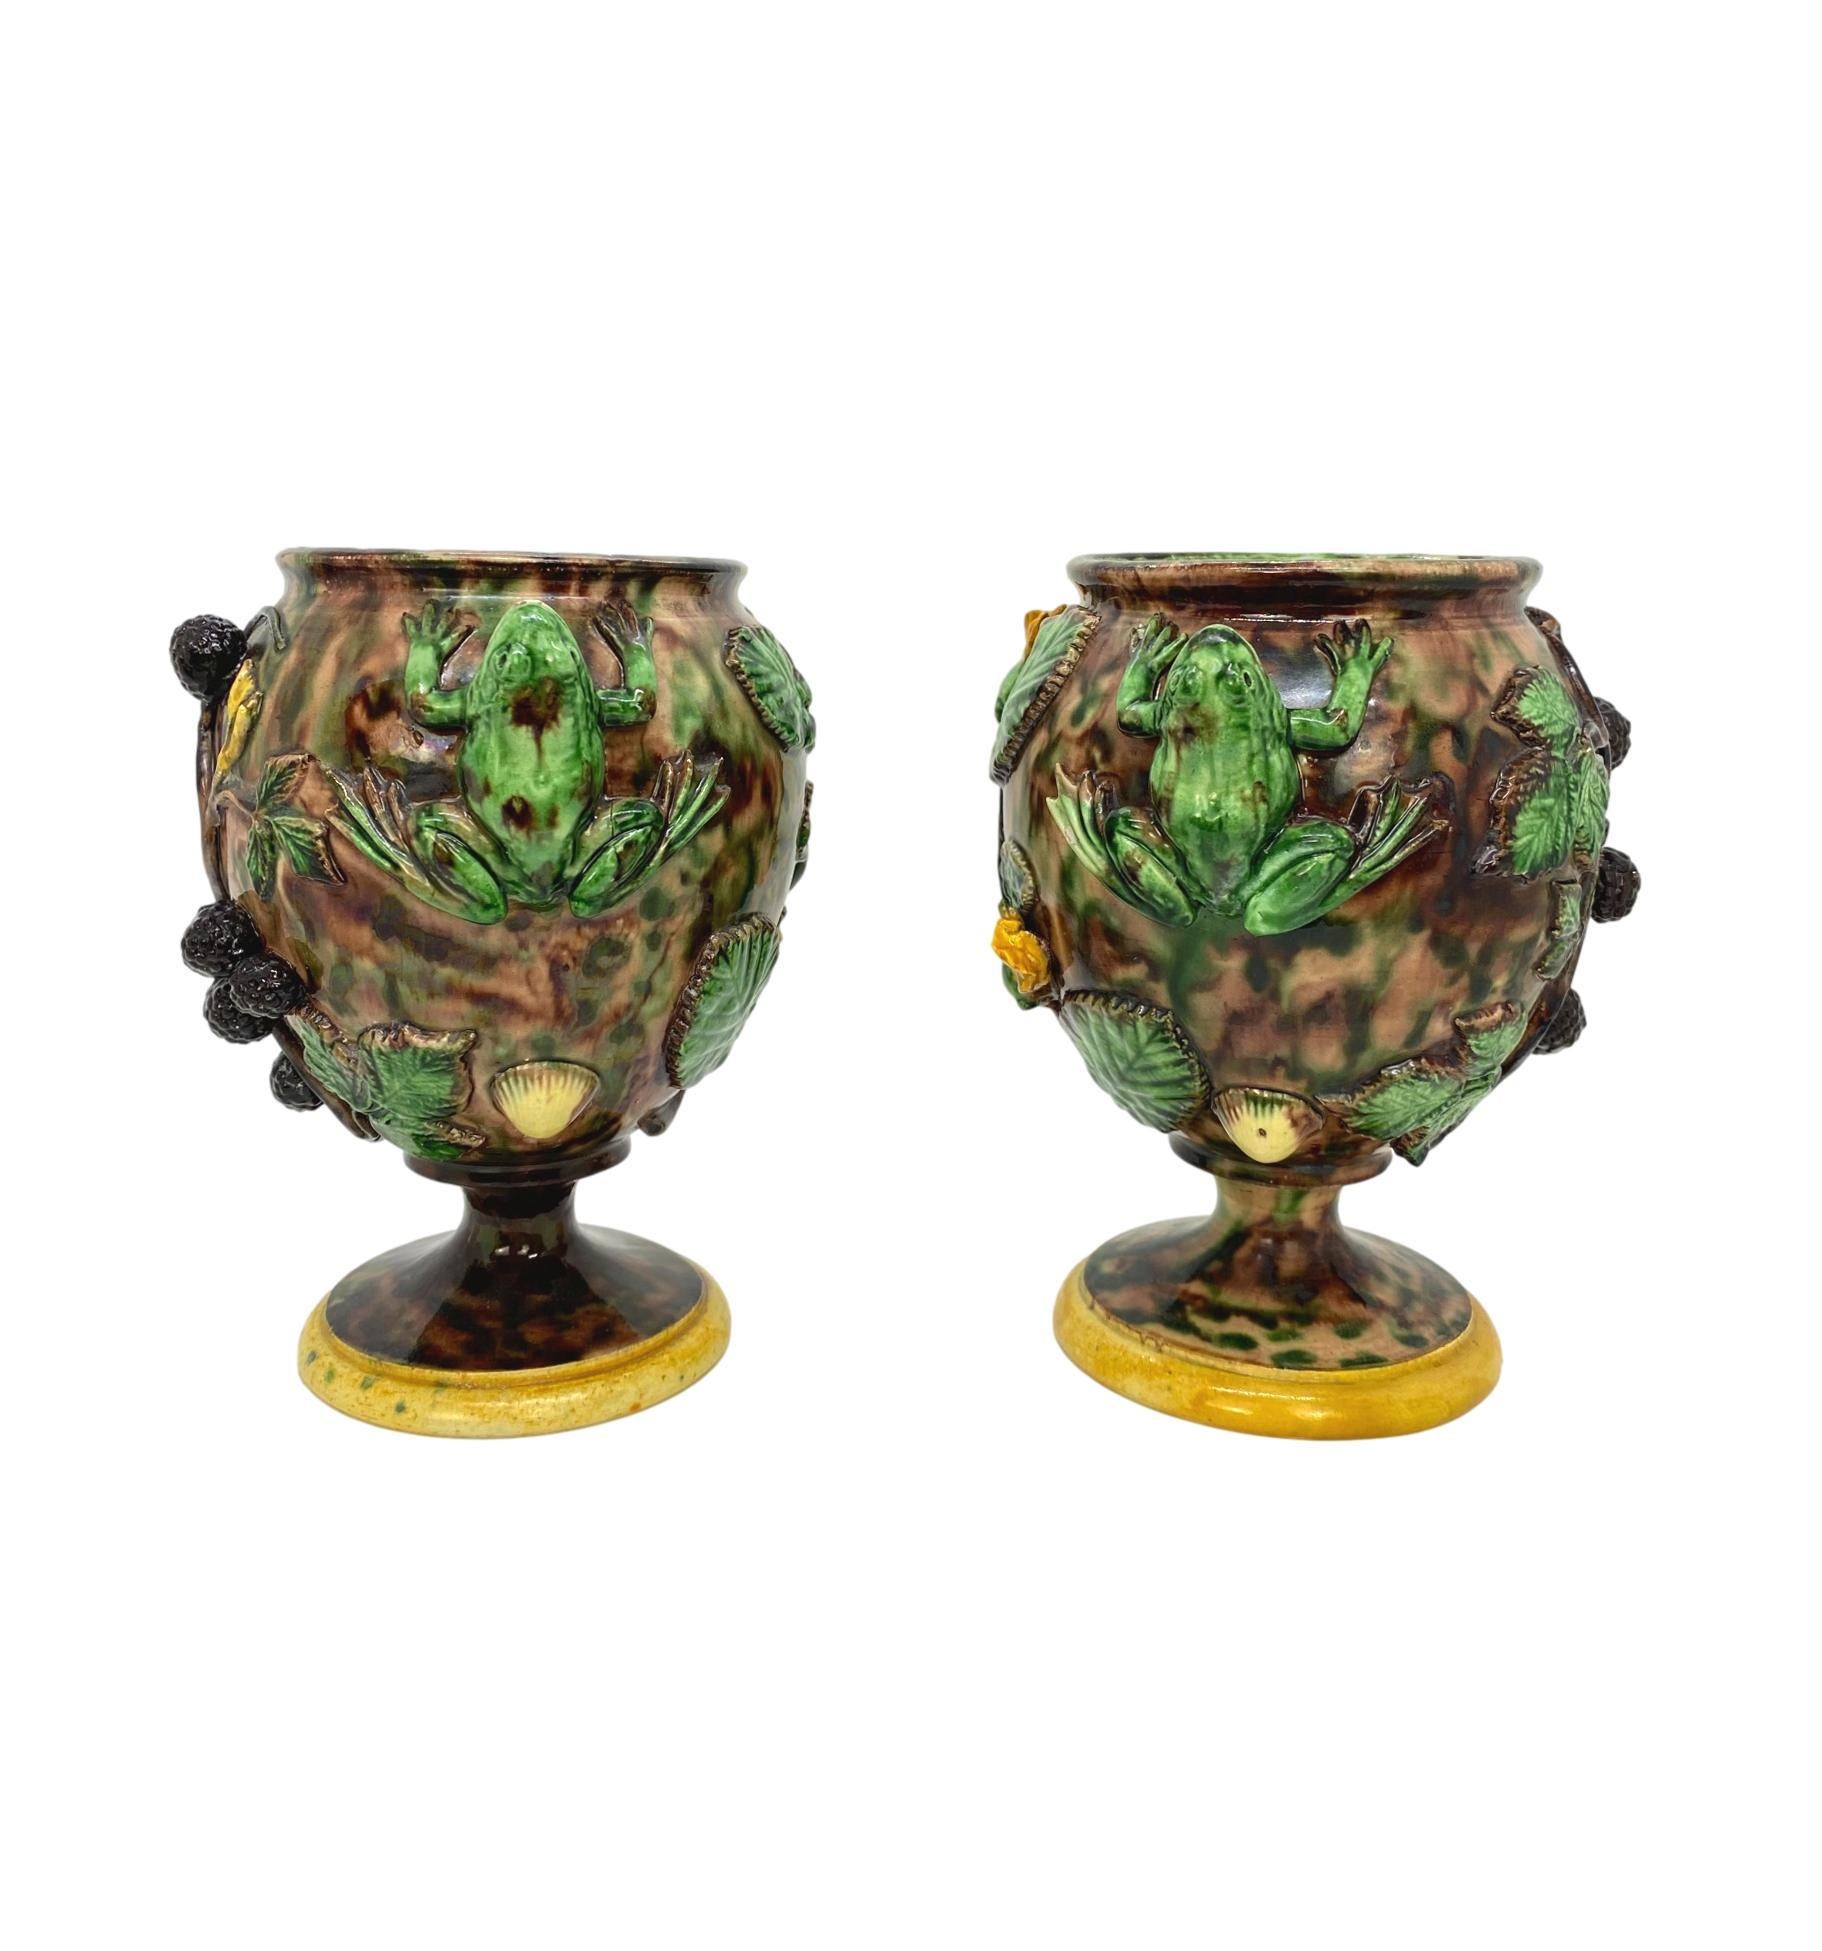 Pair of Majolica Palissy Ware vases with Frog -Form handles and blackberries by Thomas-Victor Sergent, French, circa 1885.
Thomas-Victor Sergent, (French, 1830-1890). Sergent was an important member of the School of Paris; he established his studio